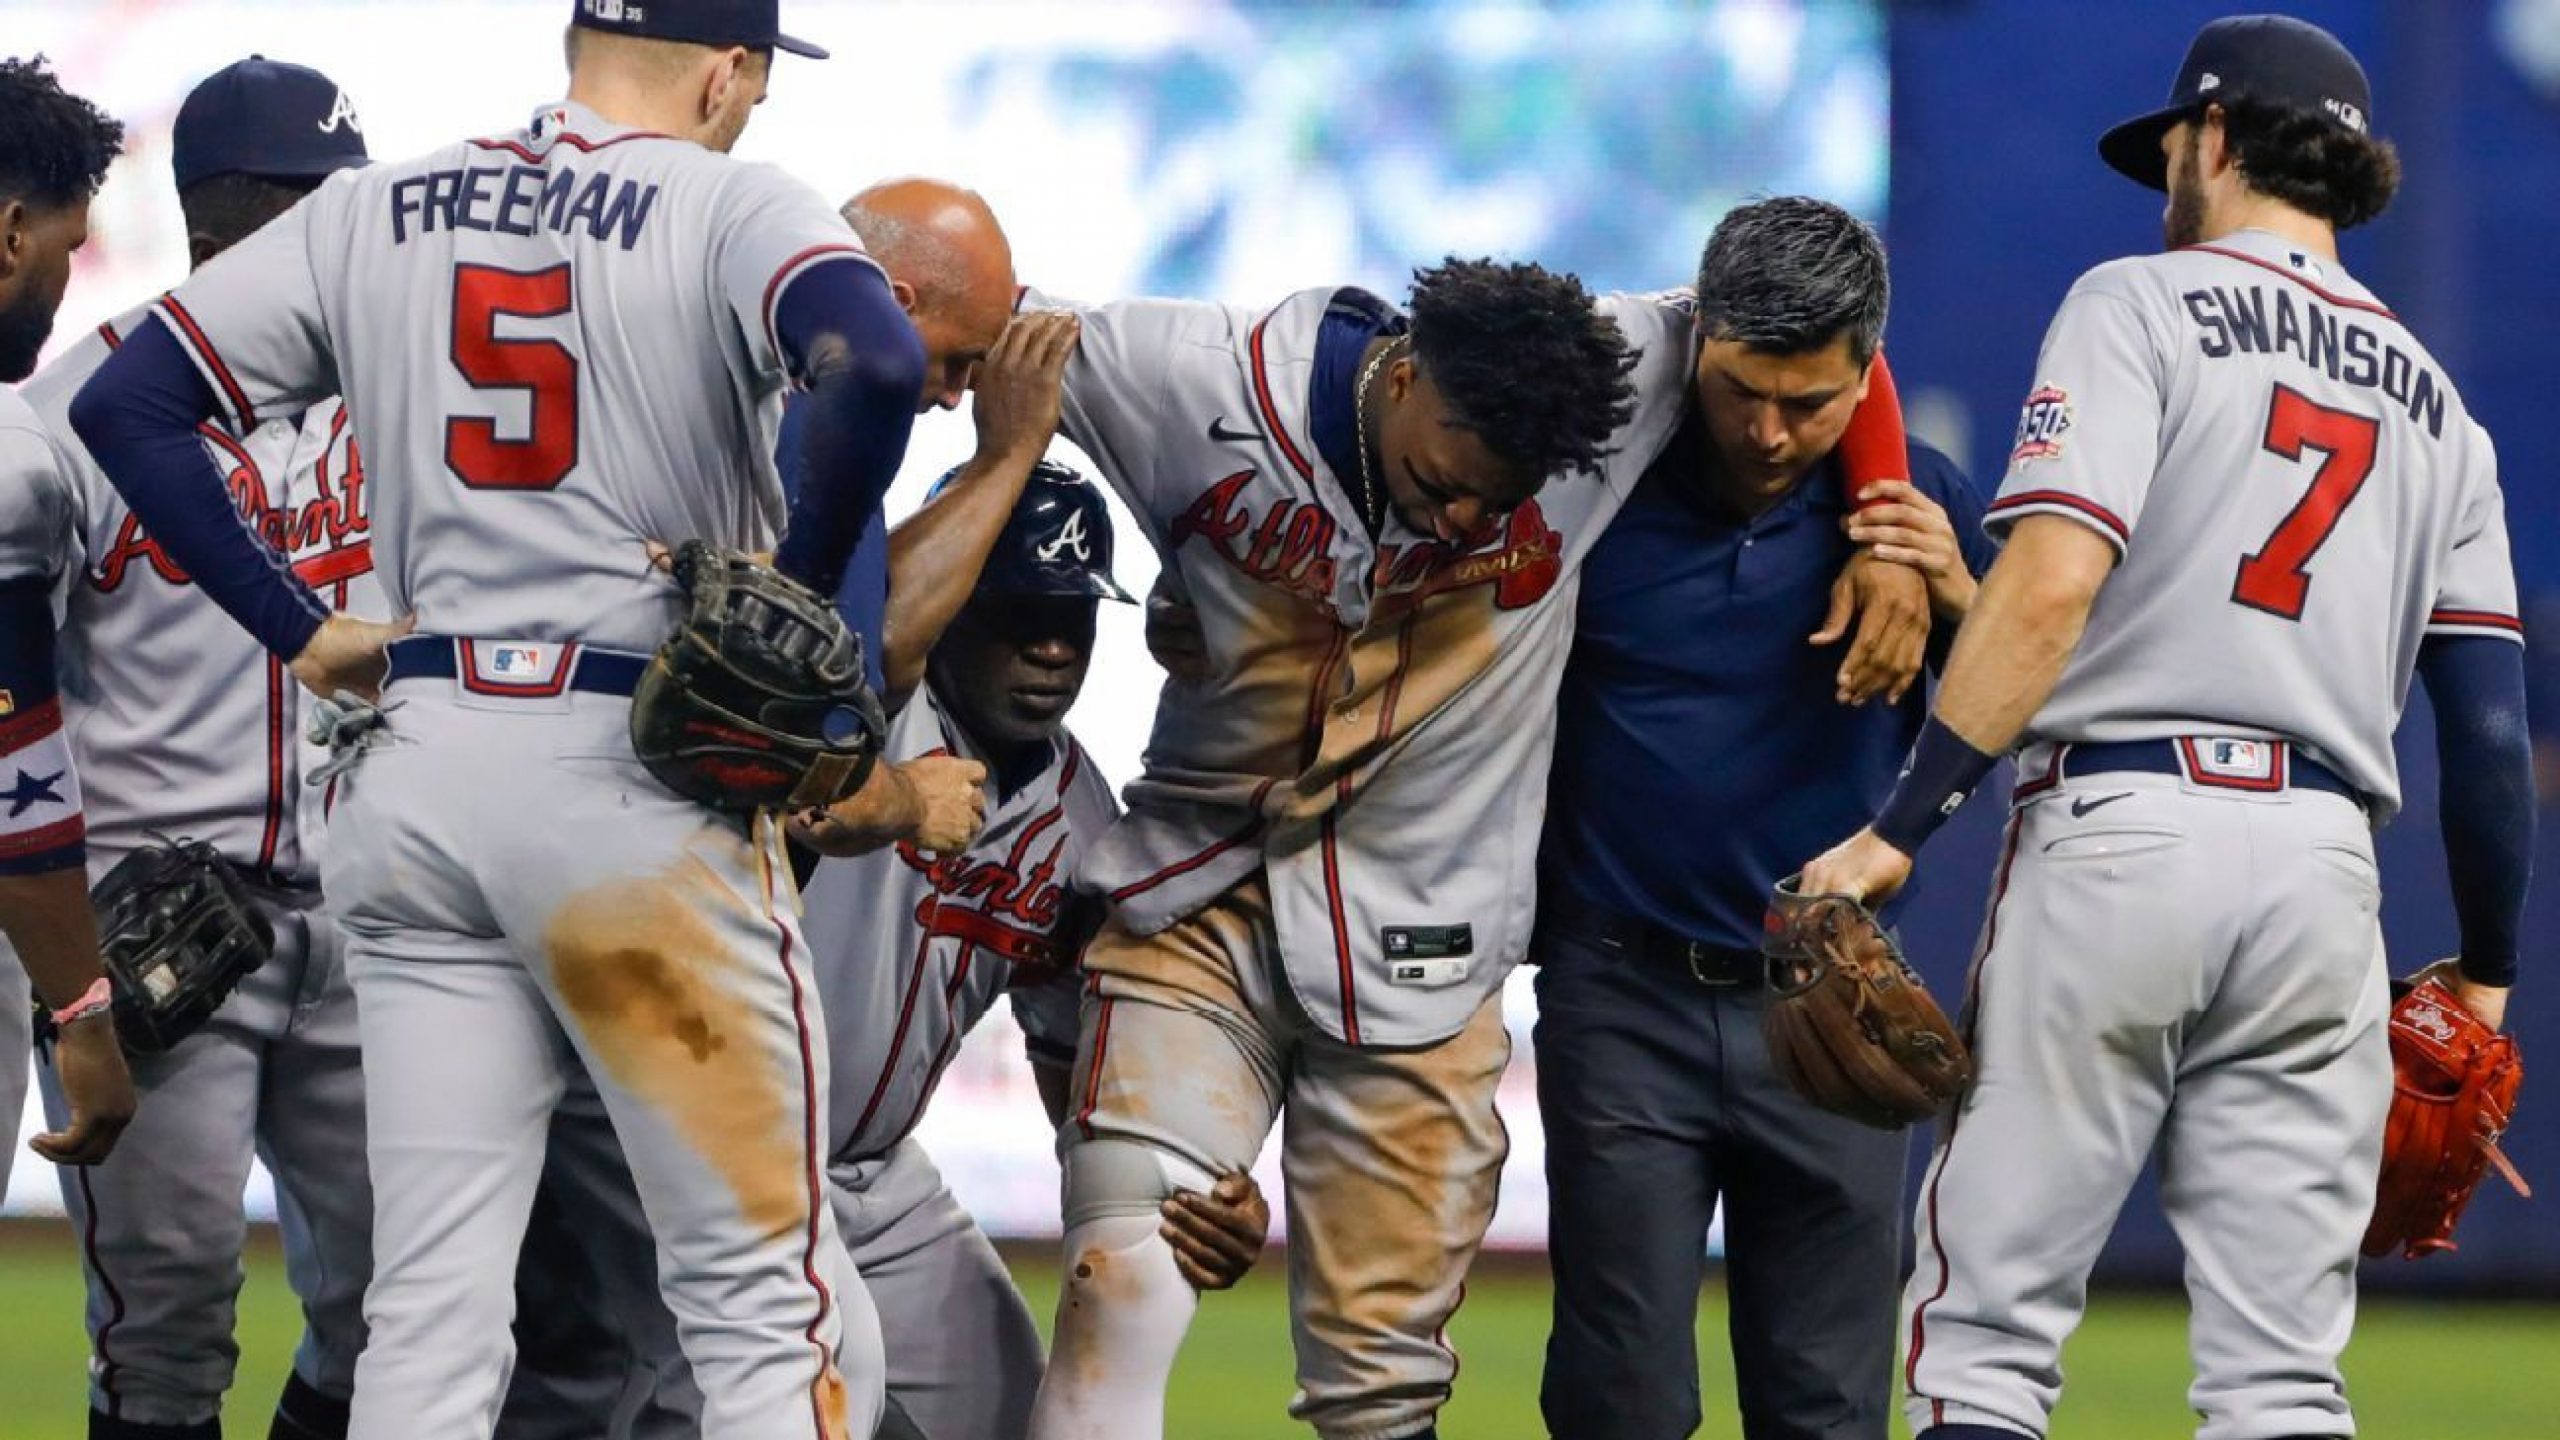 Acuna vows he will return stronger than ever